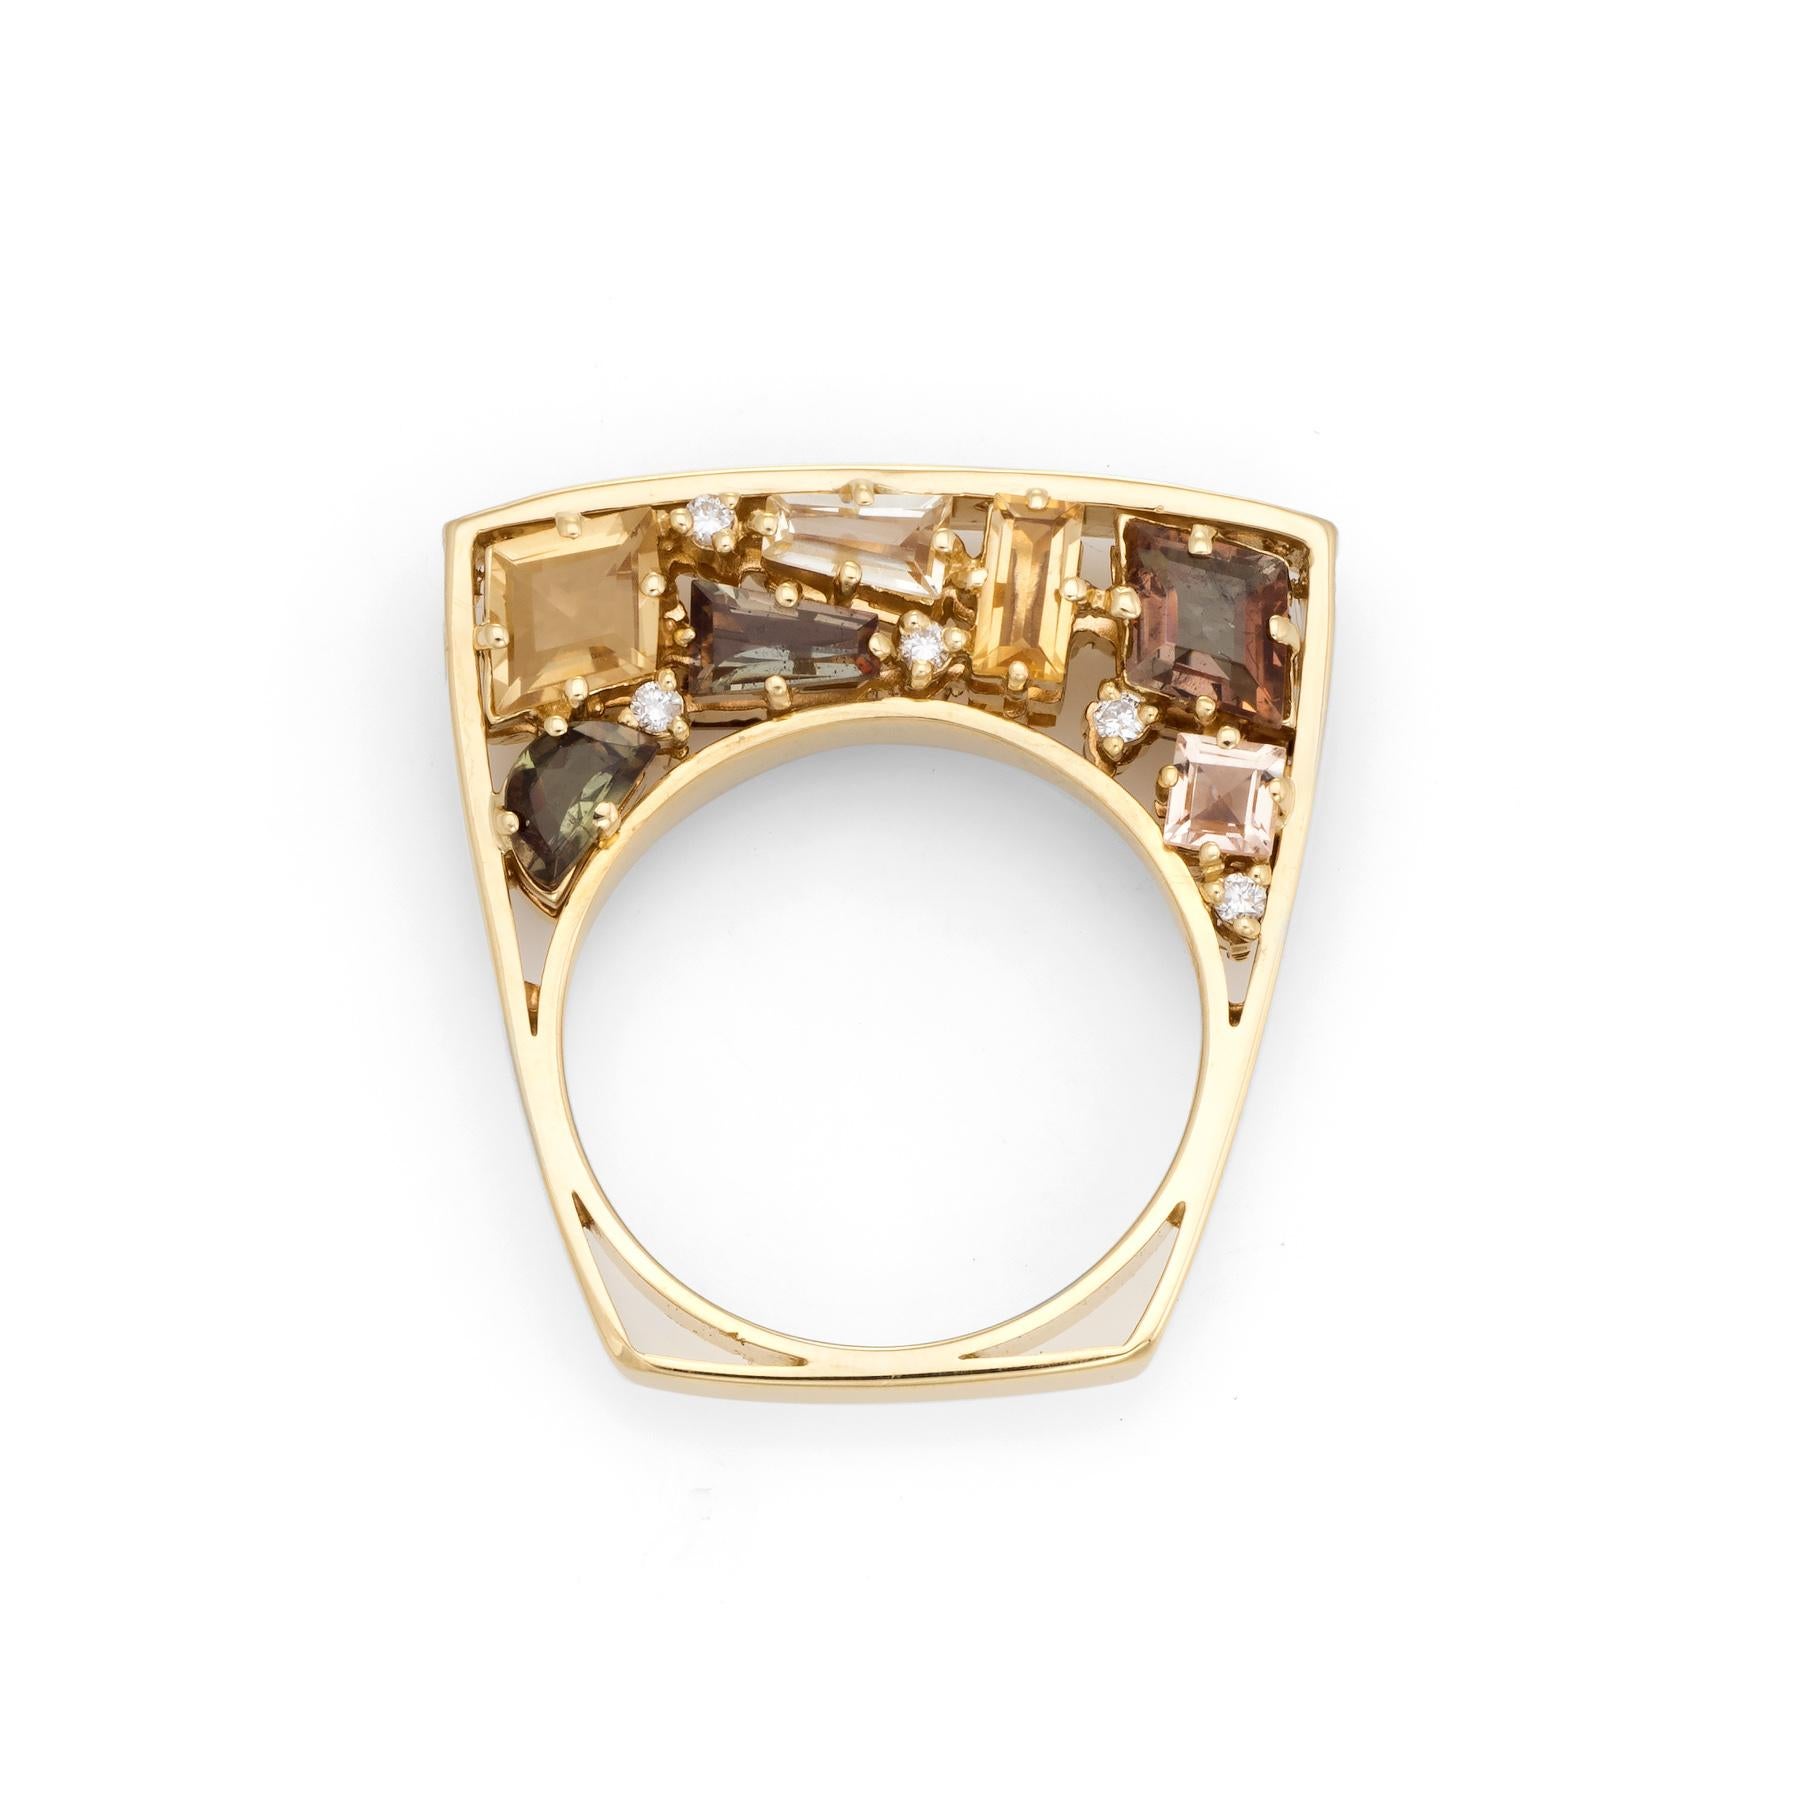 Finely detailed estate bridge ring, crafted in 18 karat yellow gold. 

Diamonds total an estimated 0.18 carats (estimated at H-I color and SI1-2 clarity), accented with citrine and smoky quartz totaling an estimated 6 carats. the stones are mixed